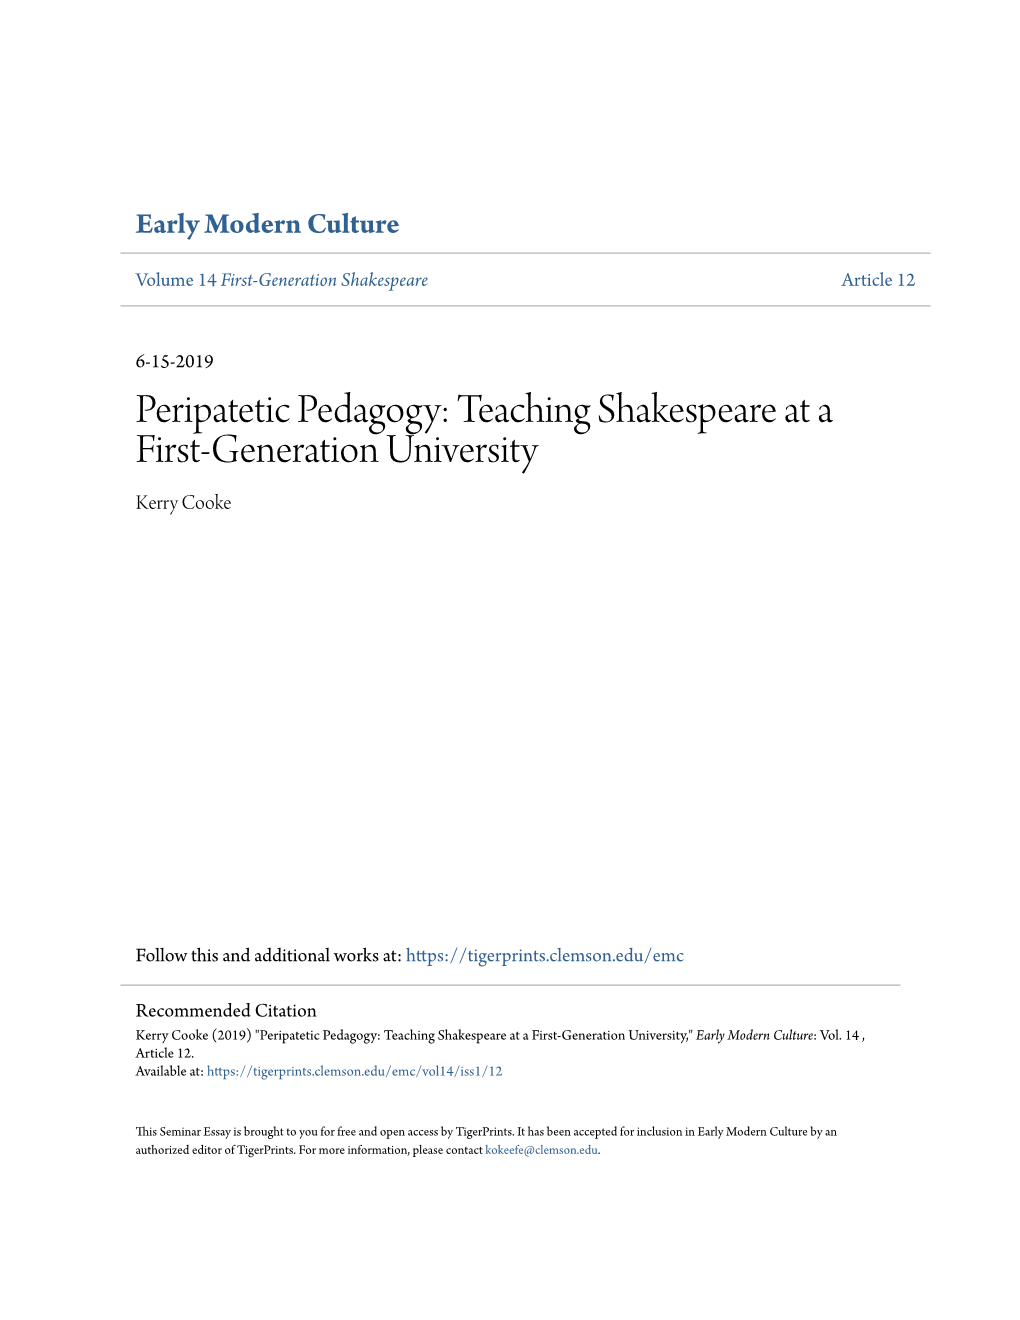 Teaching Shakespeare at a First-Generation University Kerry Cooke